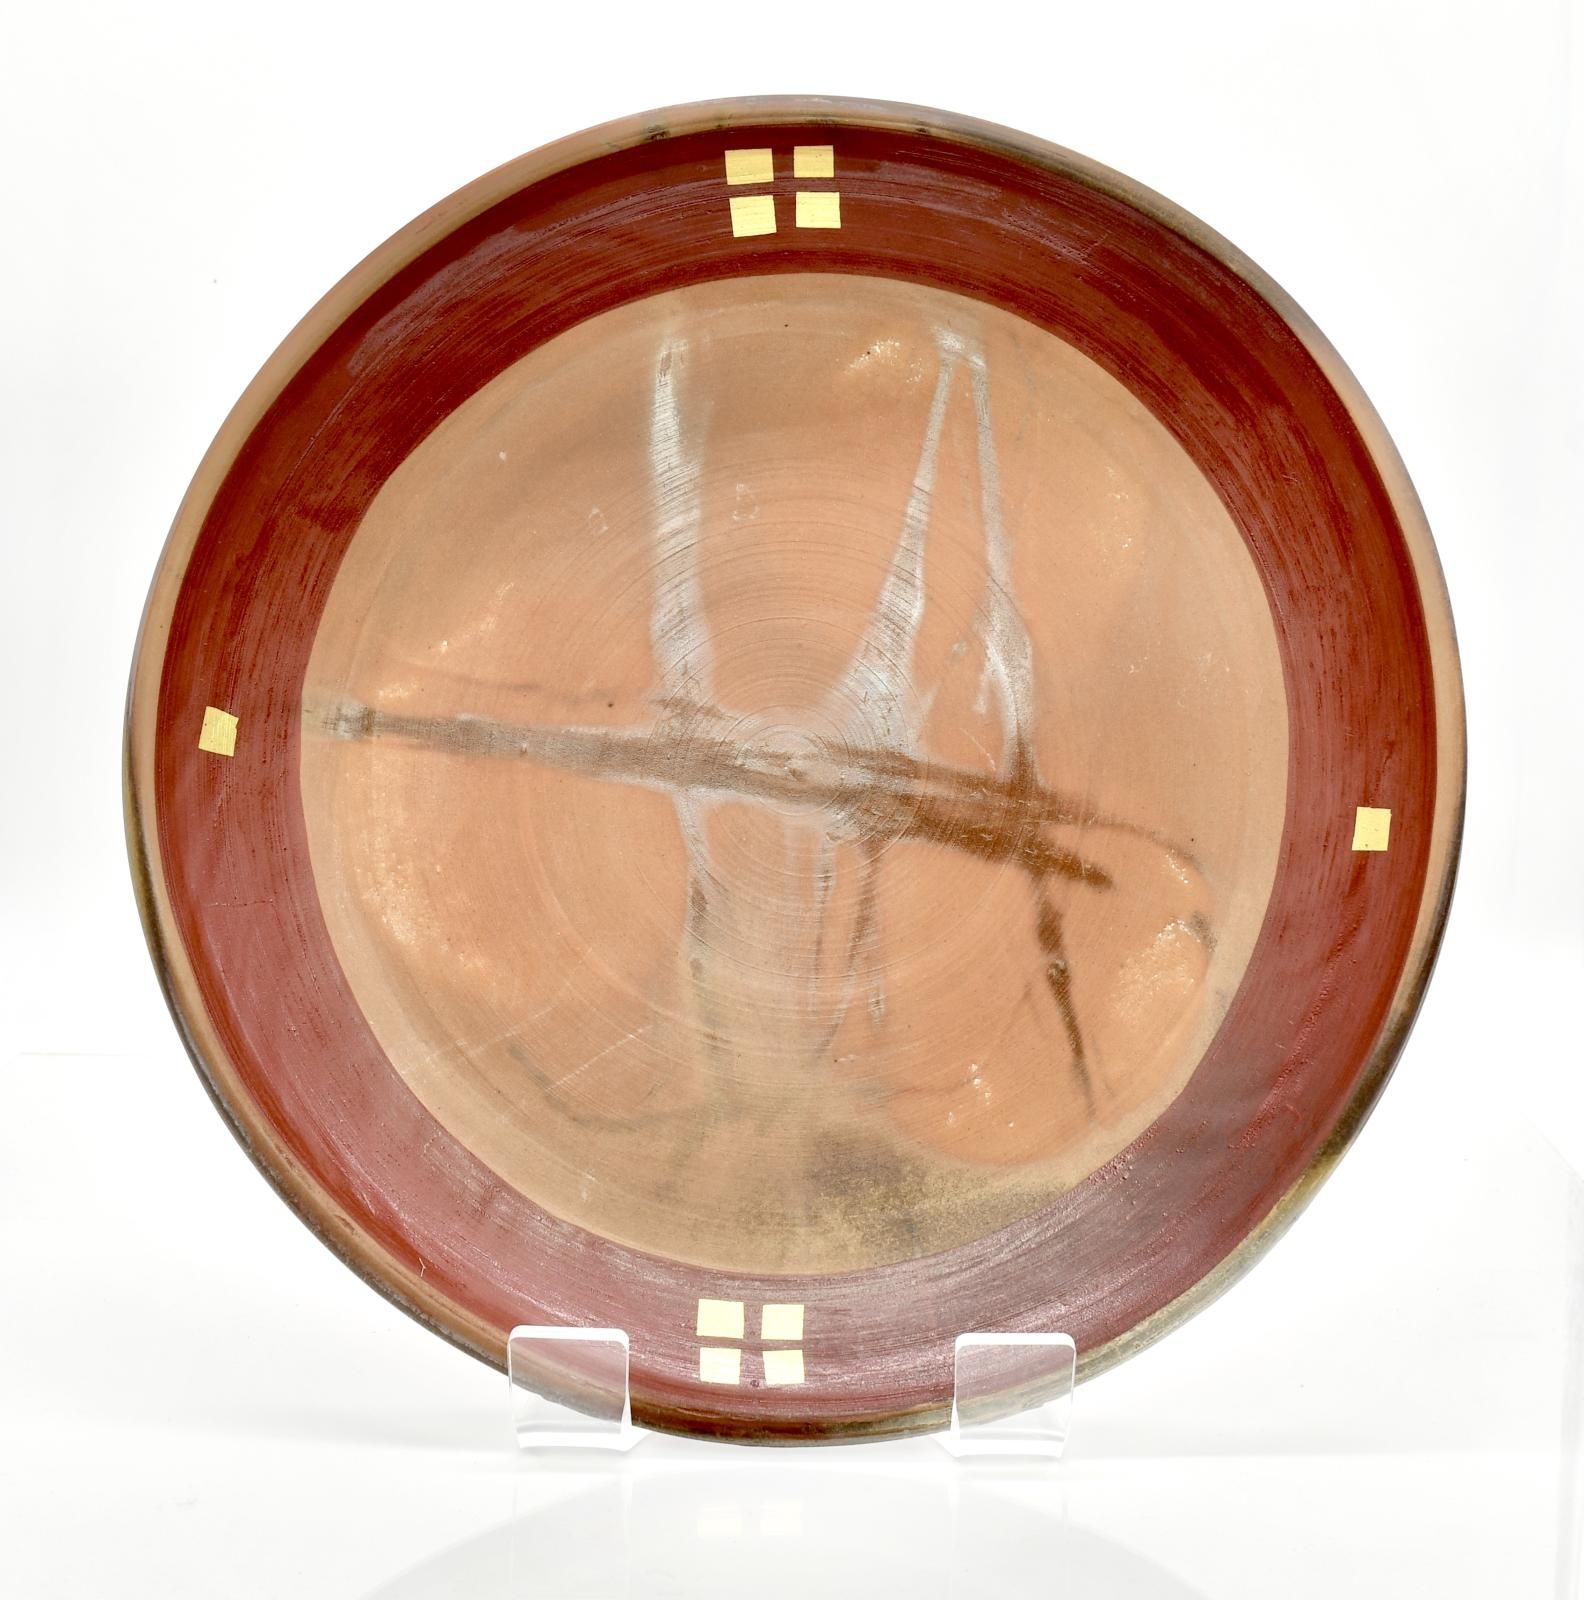 Plate, unglazed, red overglaze and gold enamel, anagama fired by Yasuo Terada